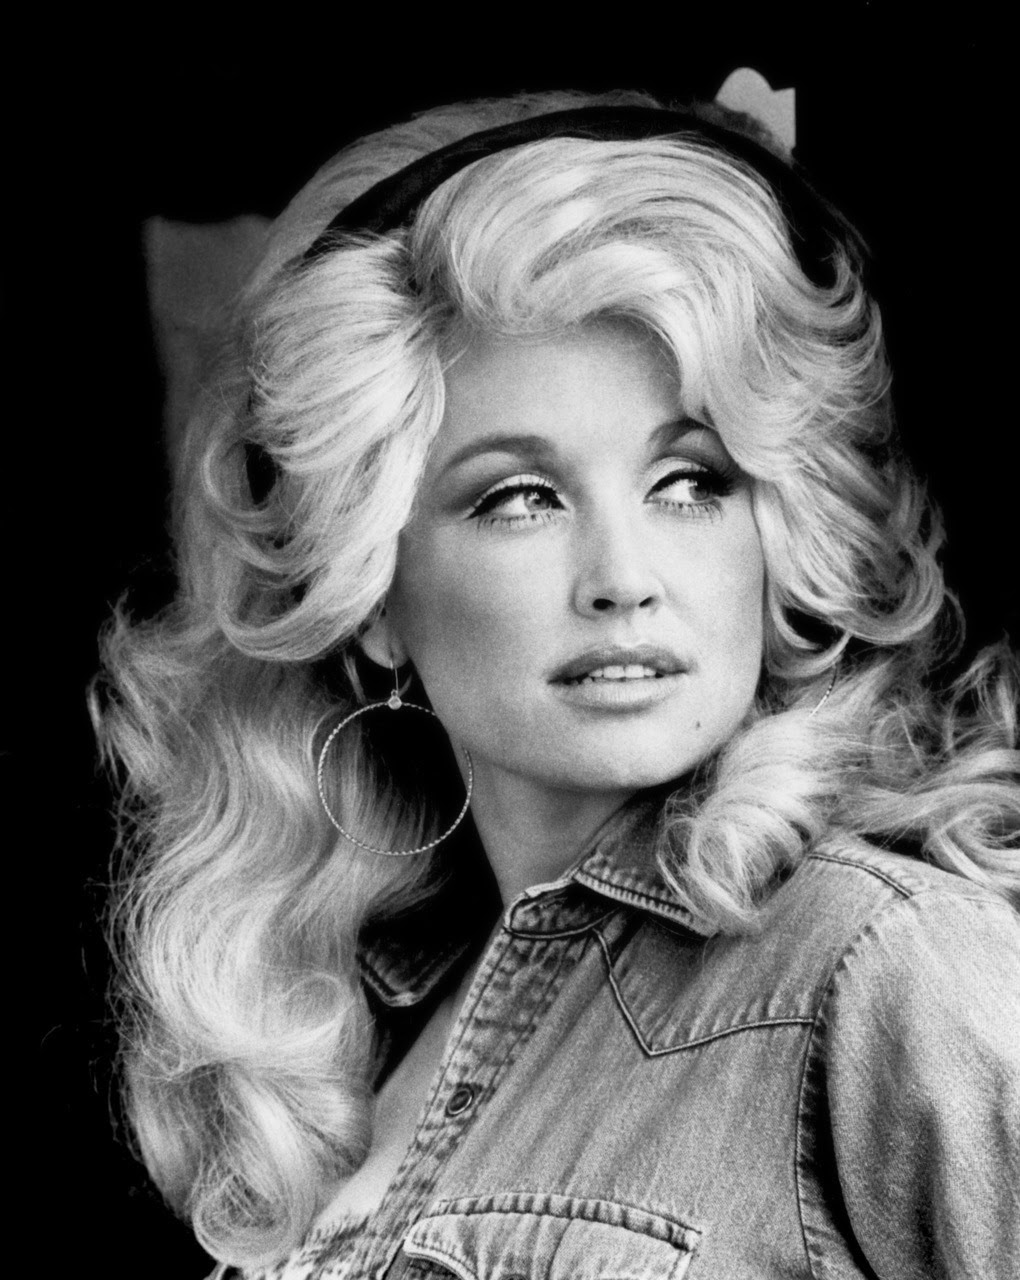 <a href="http://pitchfork.com/thepitch/1325-dolly-parton-is-for-everyone/" target="_blank">PITCHFORK</a>